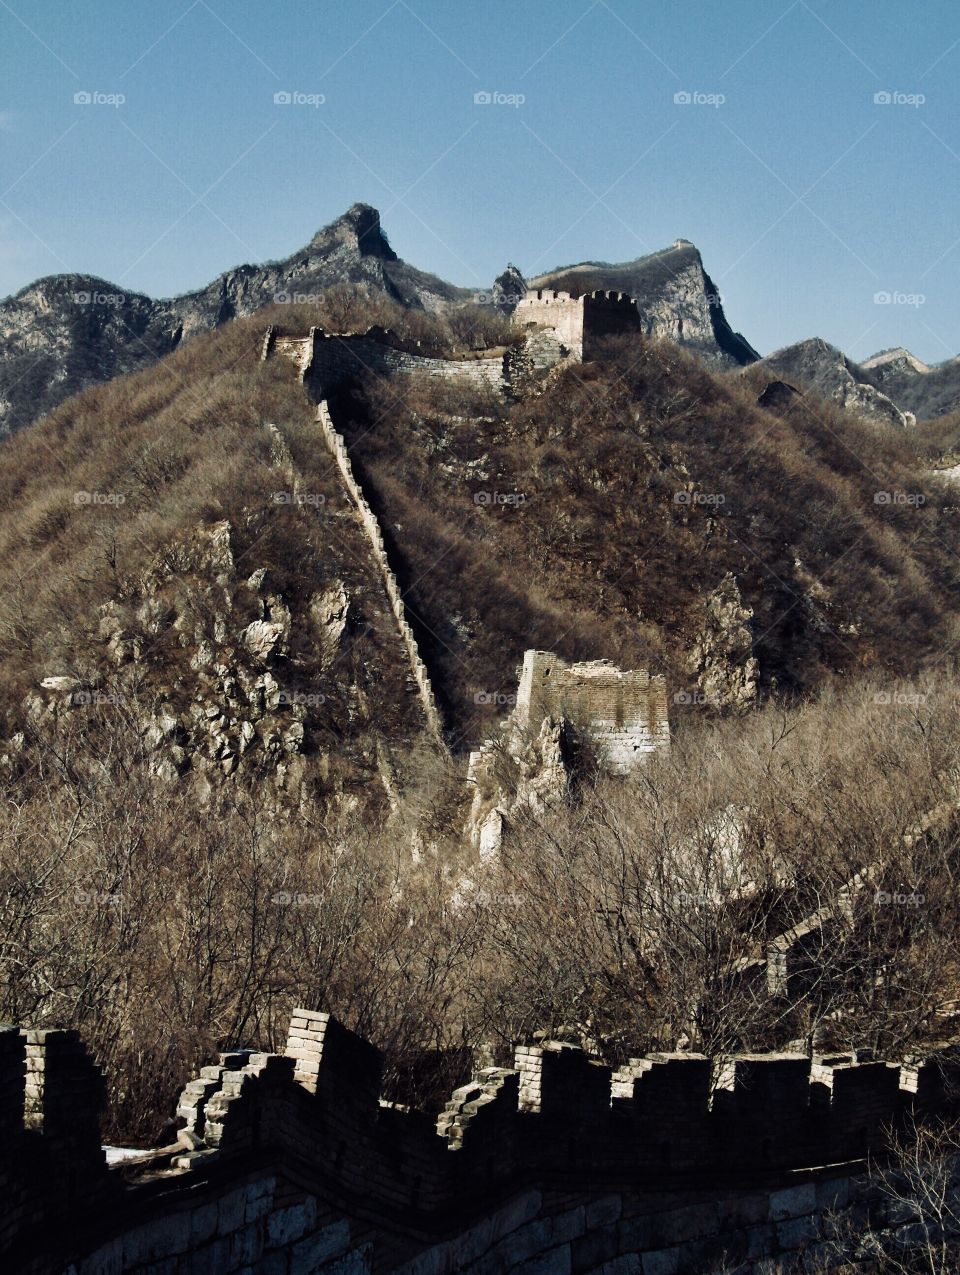 Hiking the ruins of the Great Wall near Beijing China 